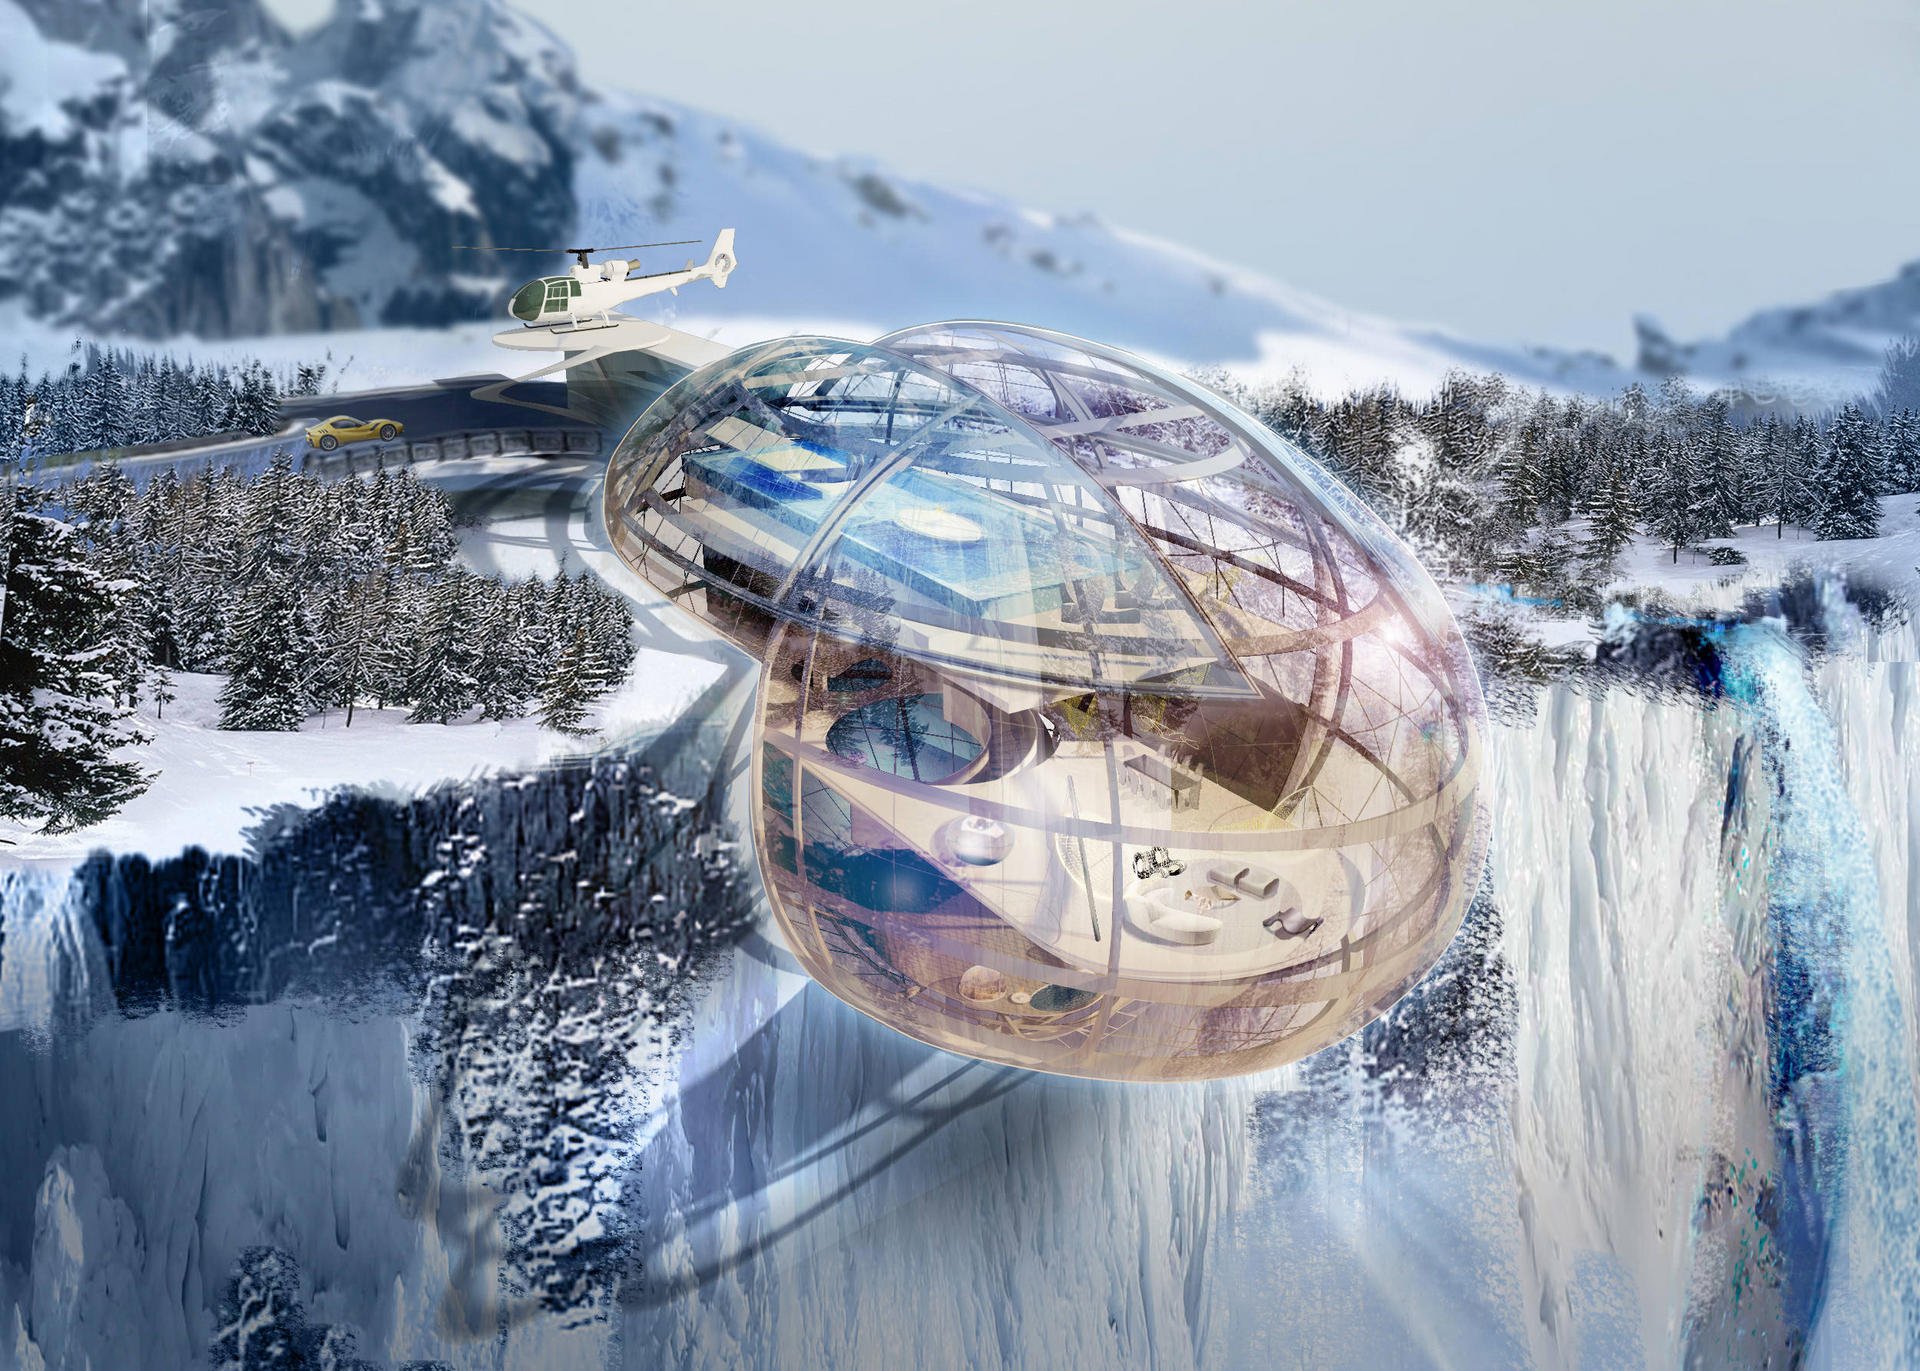 The home spa complex in the Alps features spa facilities on the lower floor and an infinity pool and glass dome on the top floor, with a relaxation lounge in between. Illustration: LTW